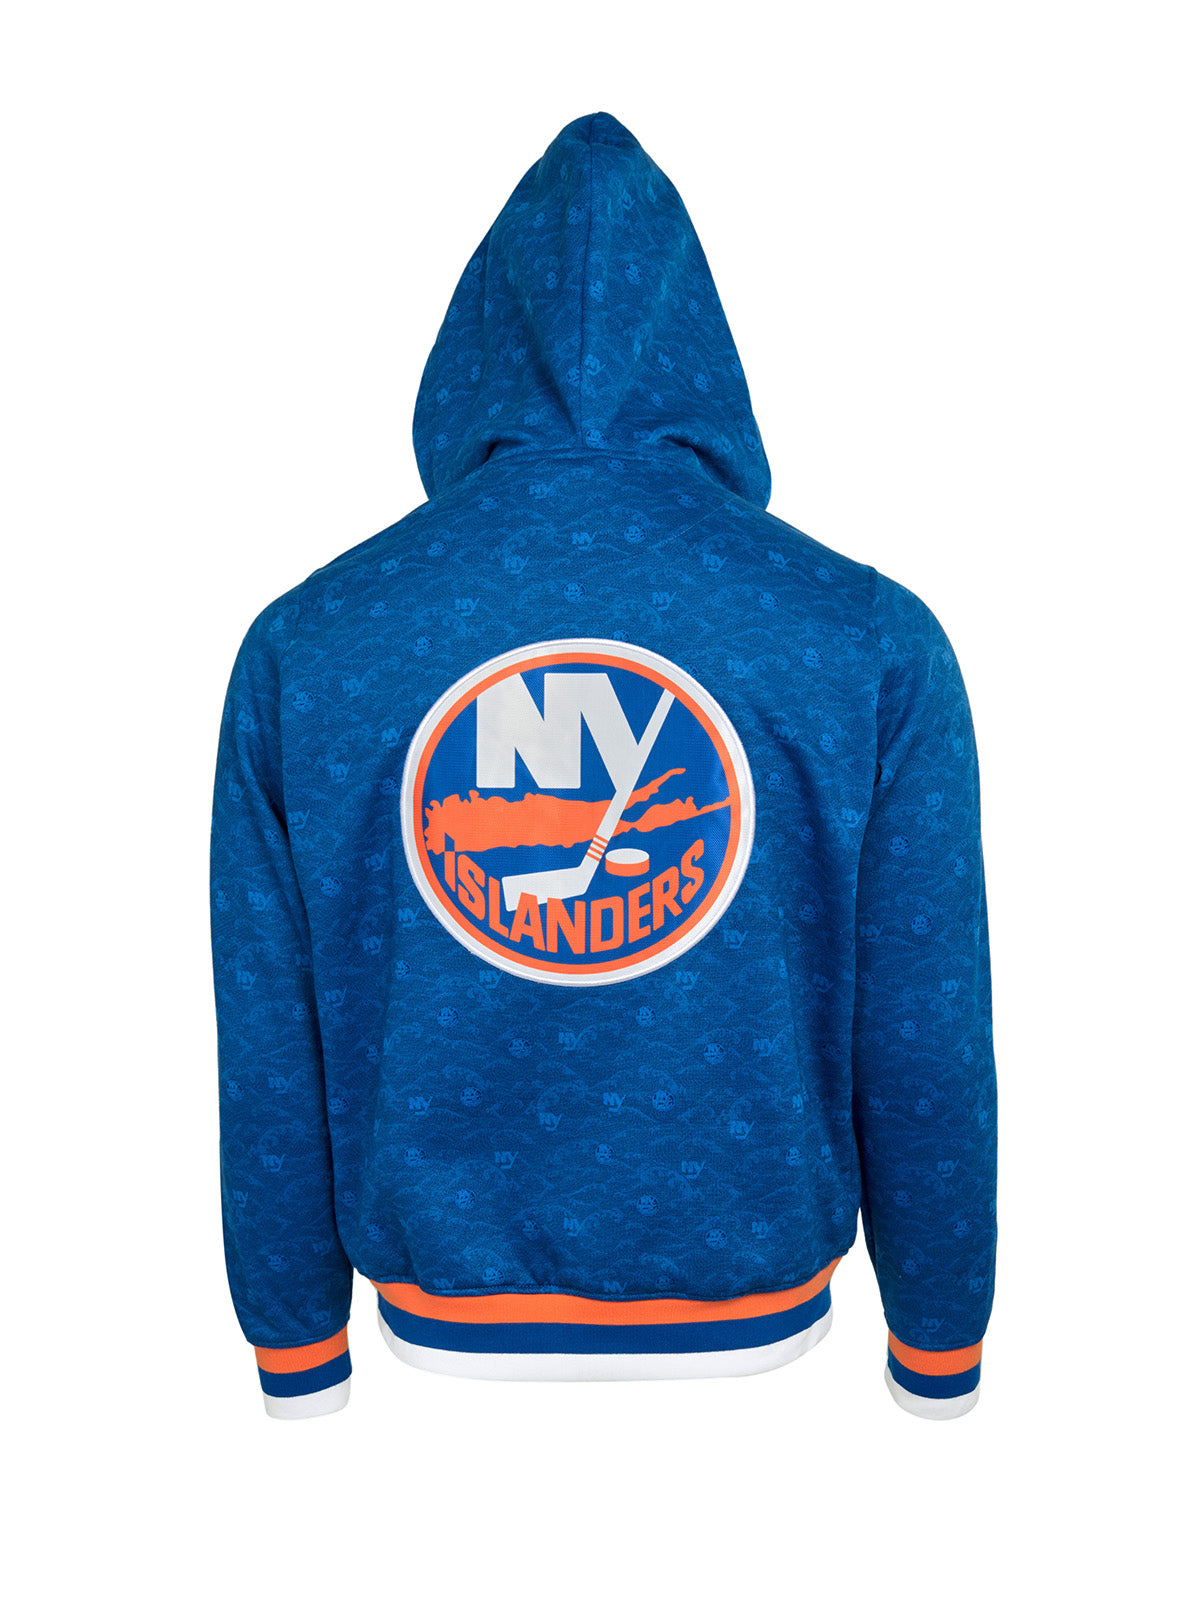 New York Islanders Hoodie - Show your team spirit, with the iconic team logo patch centered on the back, and proudly display your New York Islanders support in their team colors with this NHL hockey hoodie.